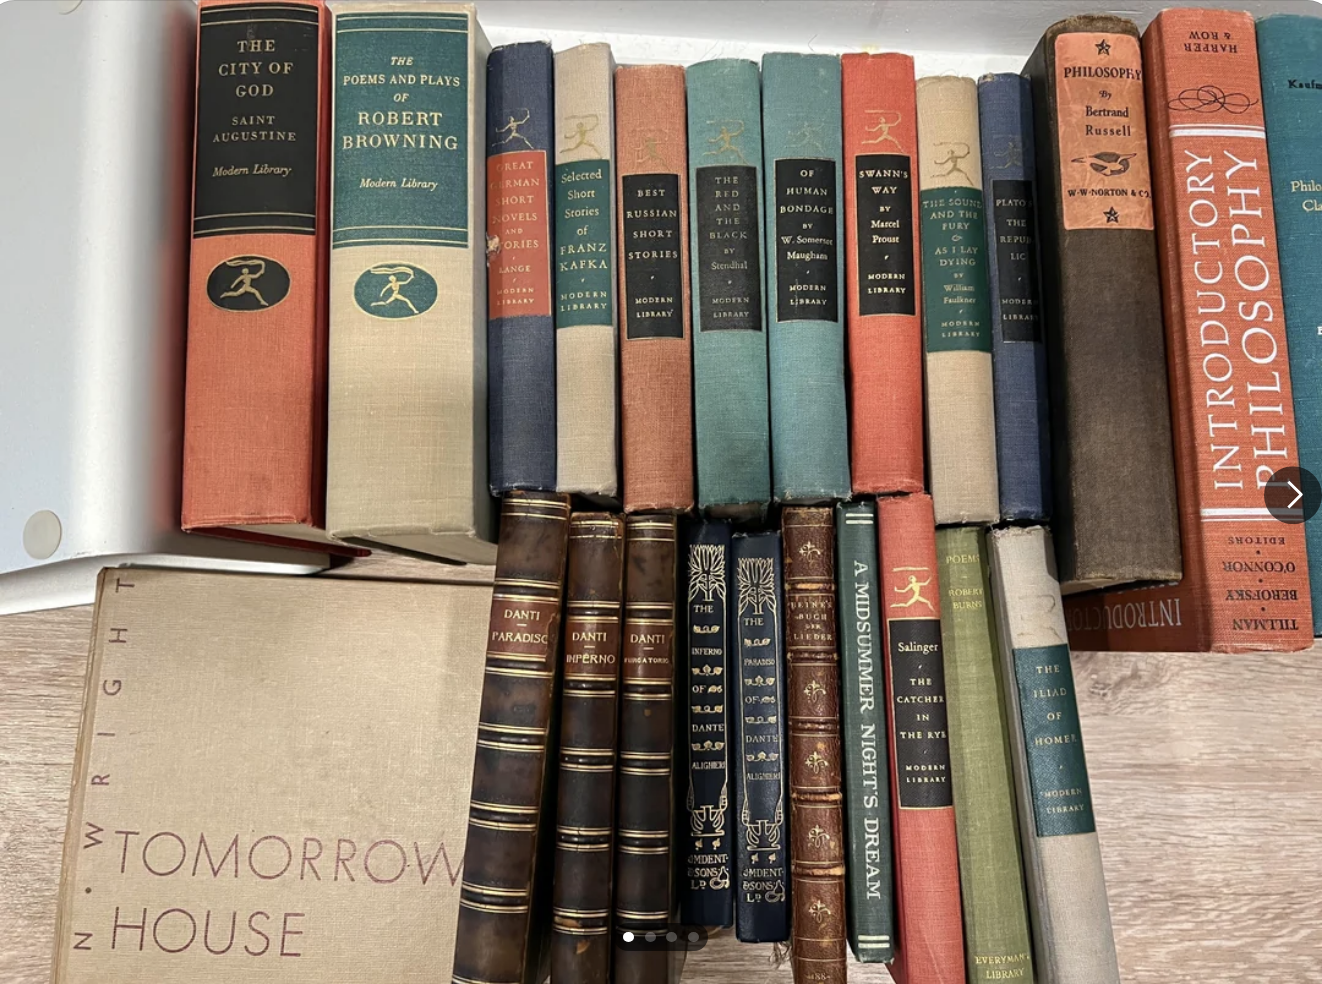 A collection of antique books, their spines facing outward